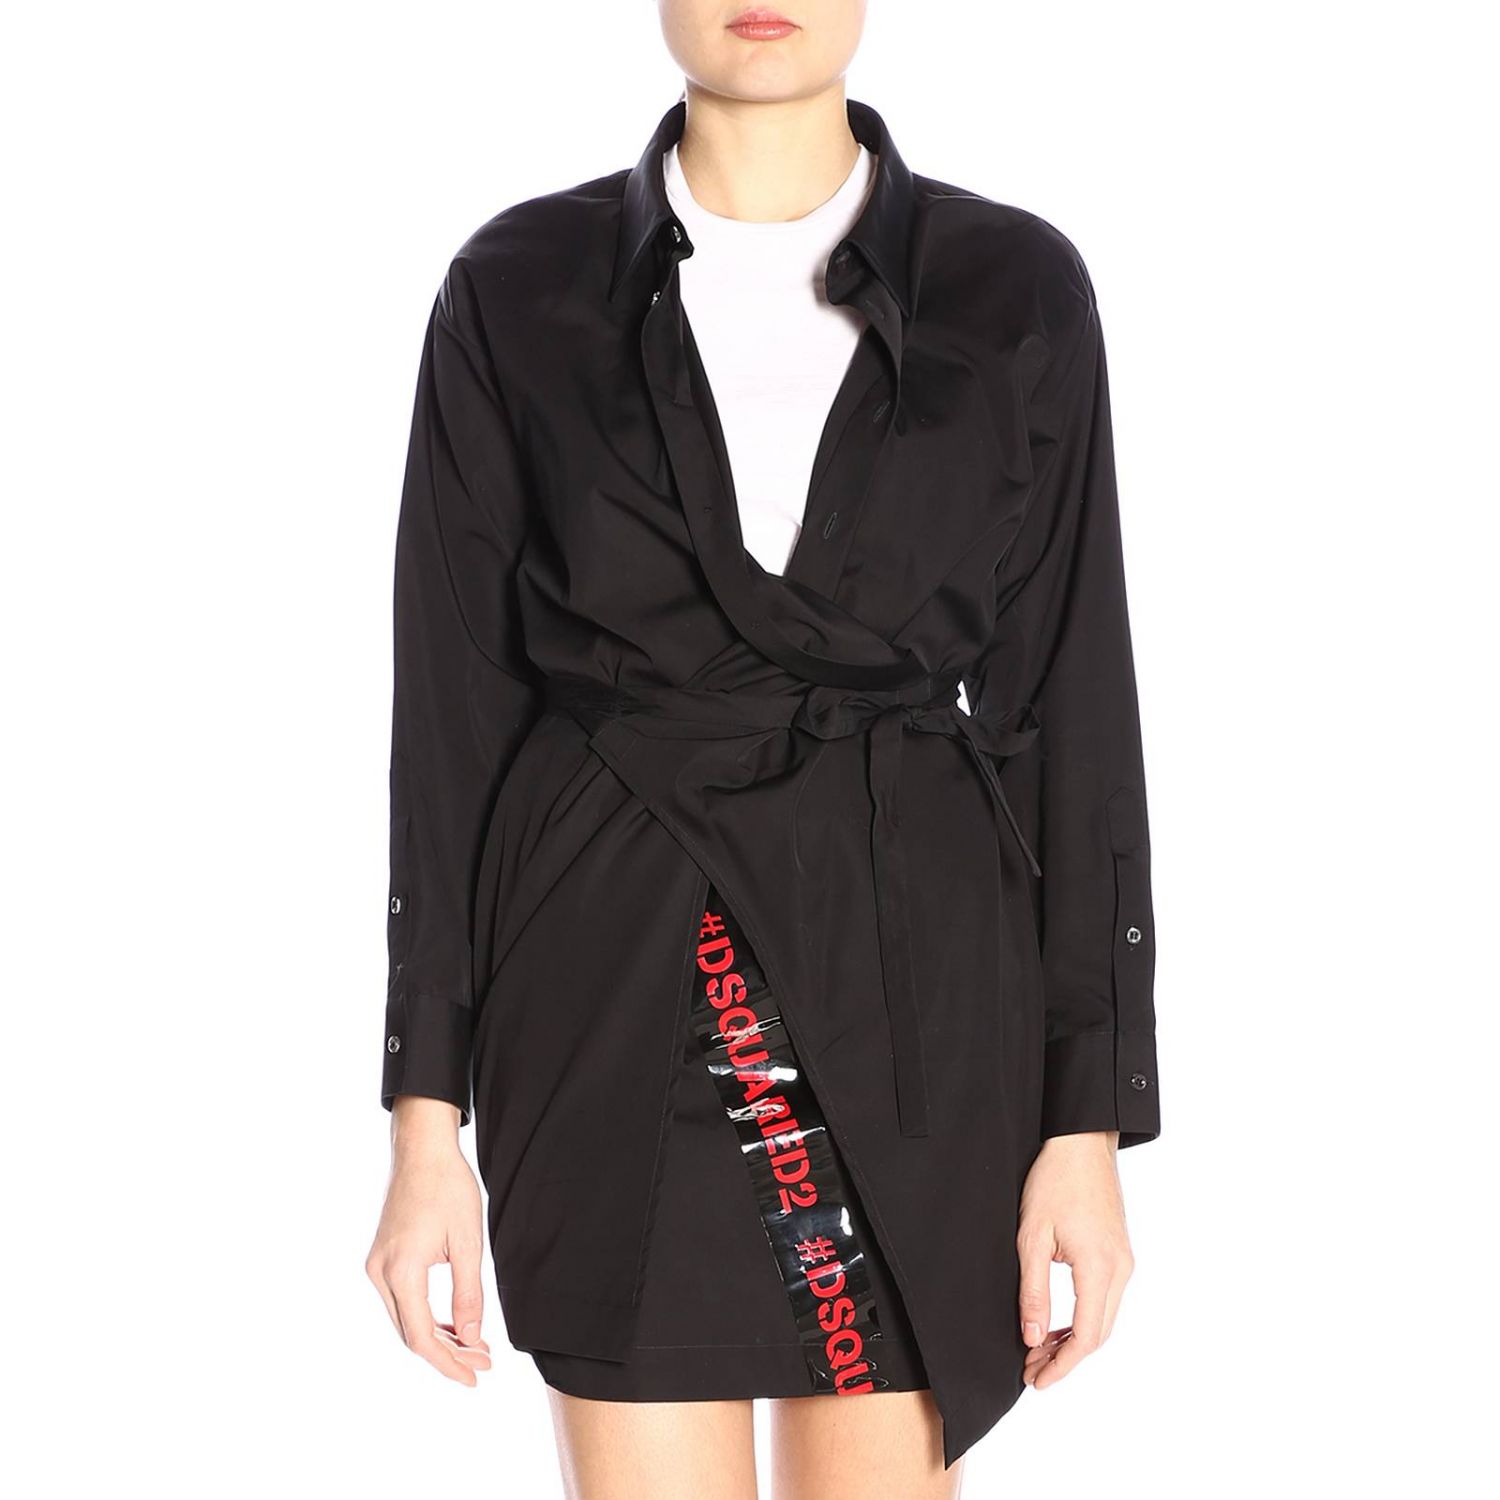 Dsquared2 Outlet: dress for woman - Black | Dsquared2 dress ...